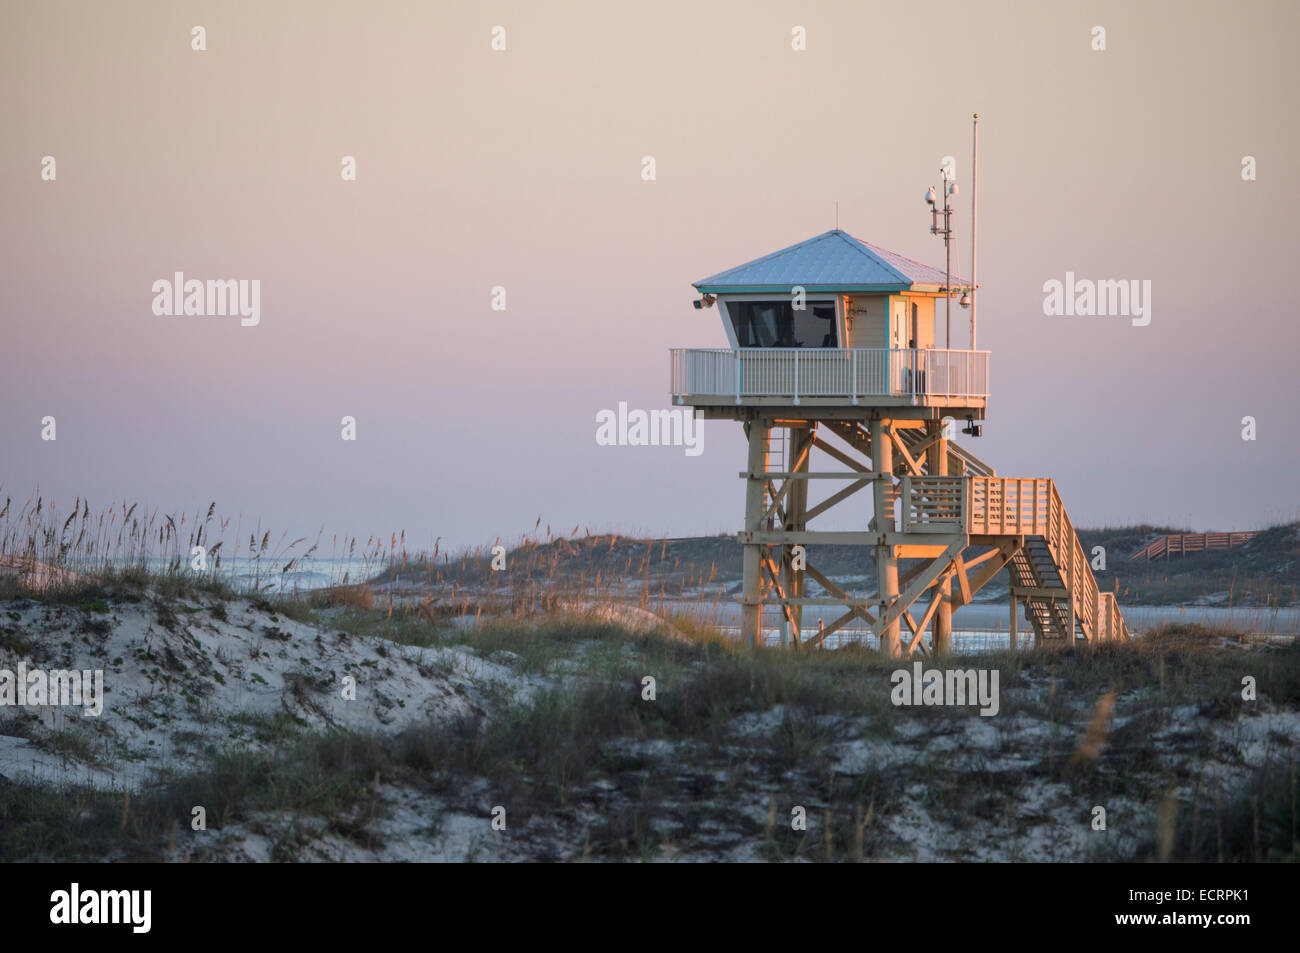 Lifequard station at Lighthouse Point Park, Volusia County, Florida USA Stock Photo